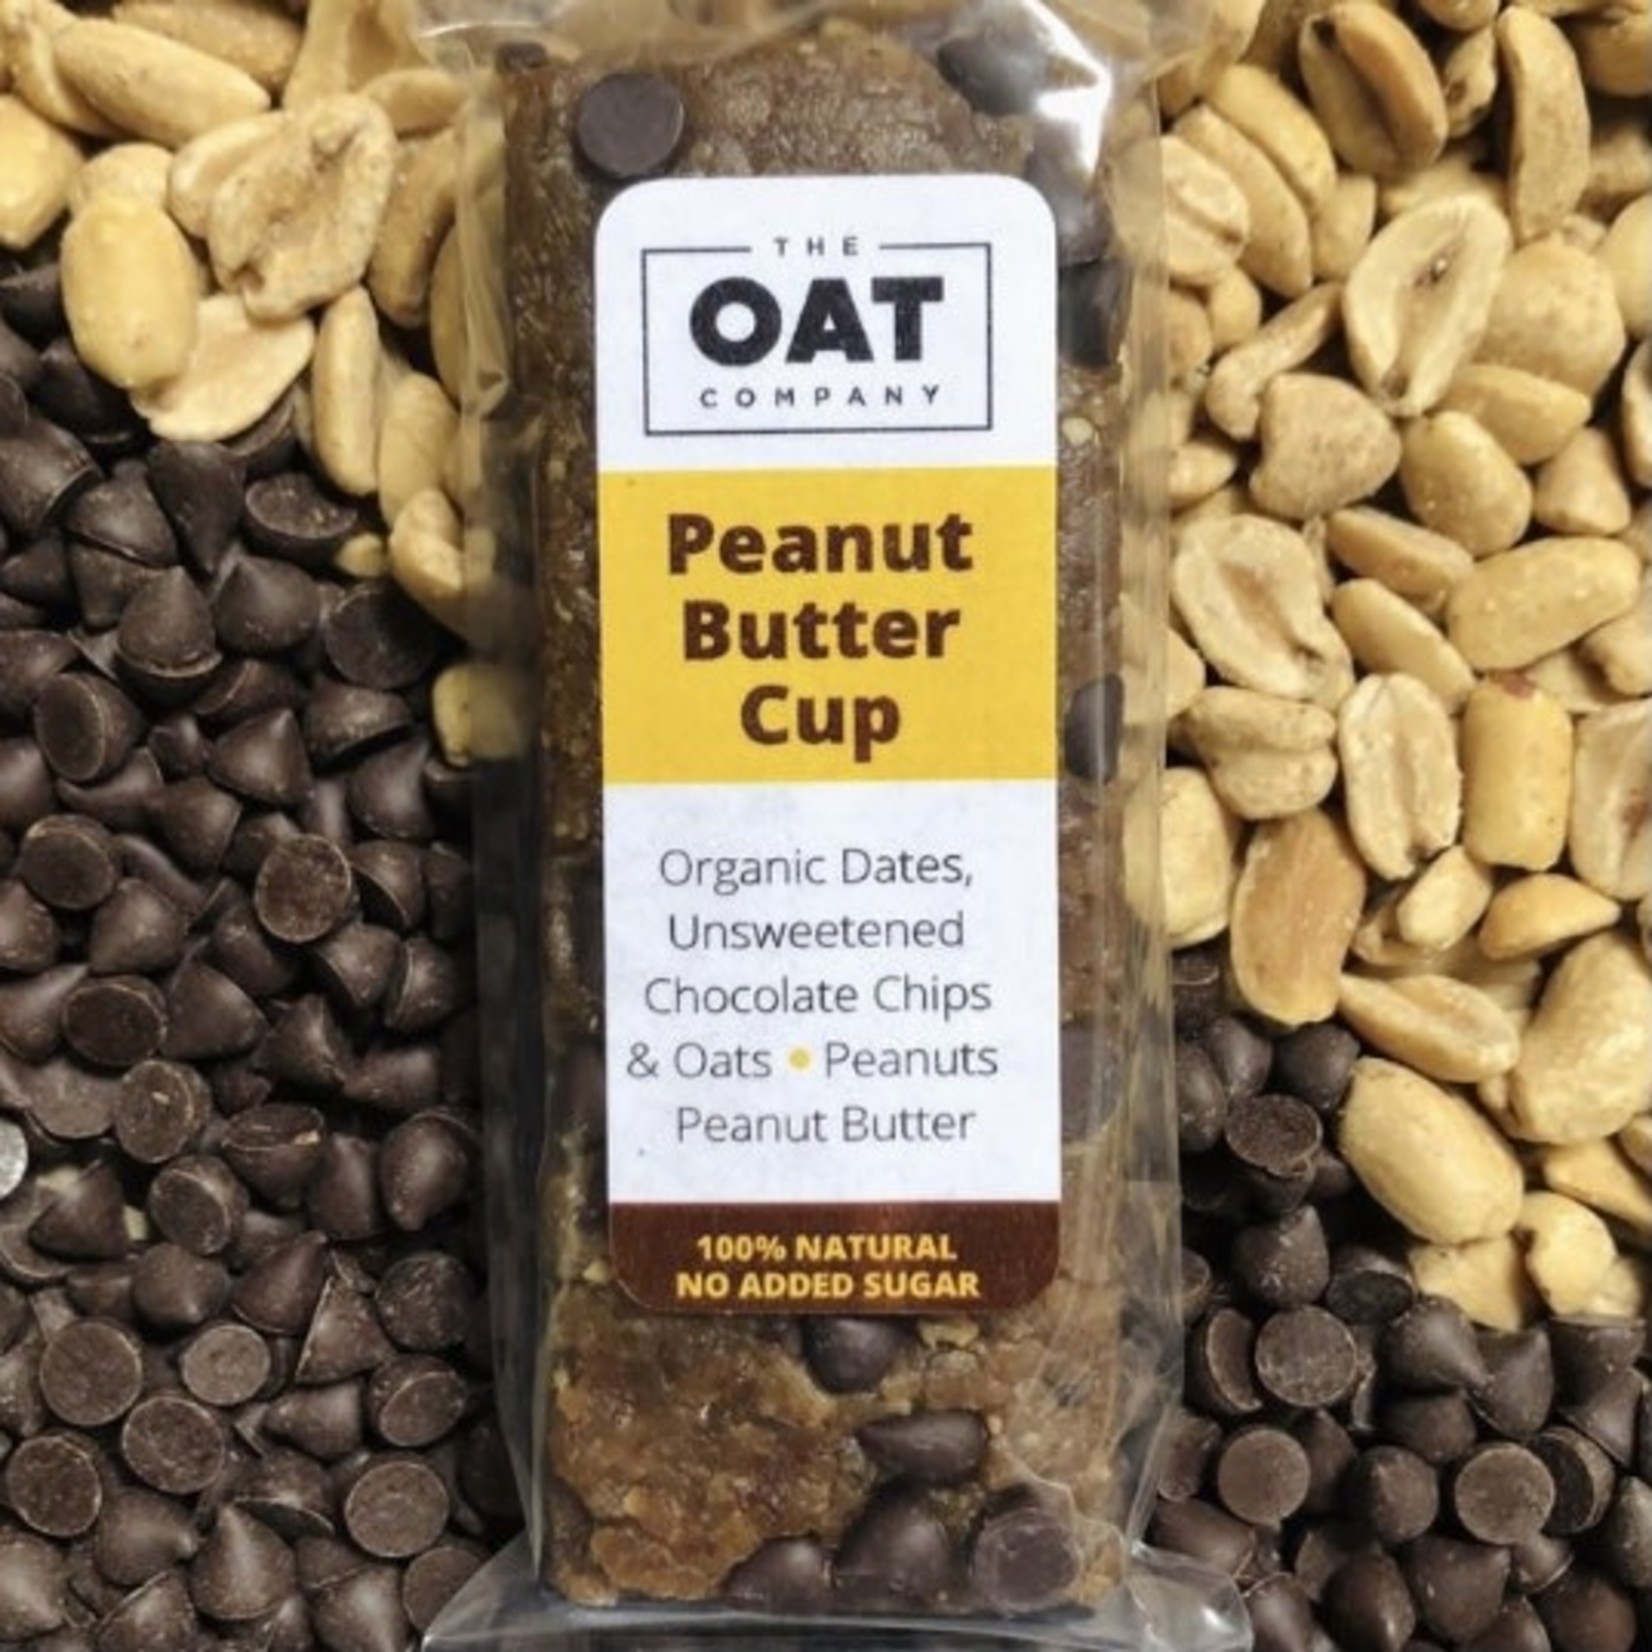 The Oat Company The Oat Company Peanut Butter Cup Bar